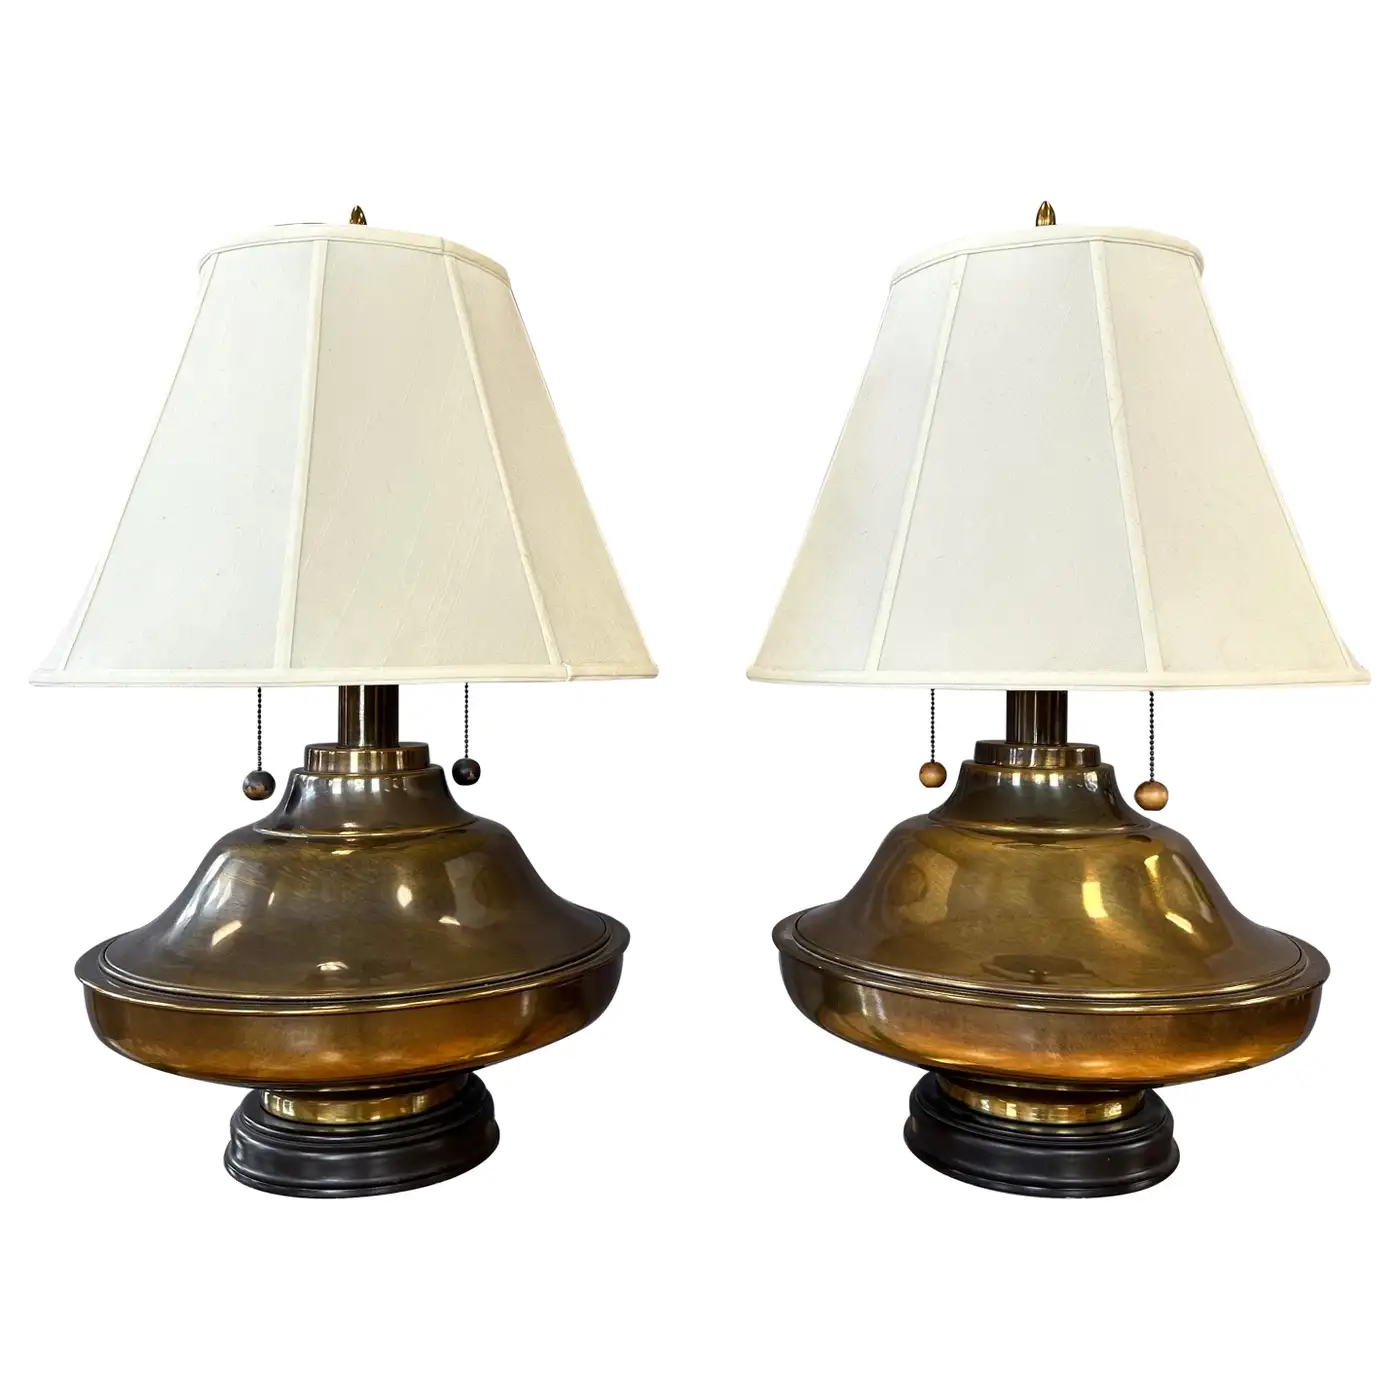 Pair of Monumental Marbro-Style Antiqued Brass Table Lamps with